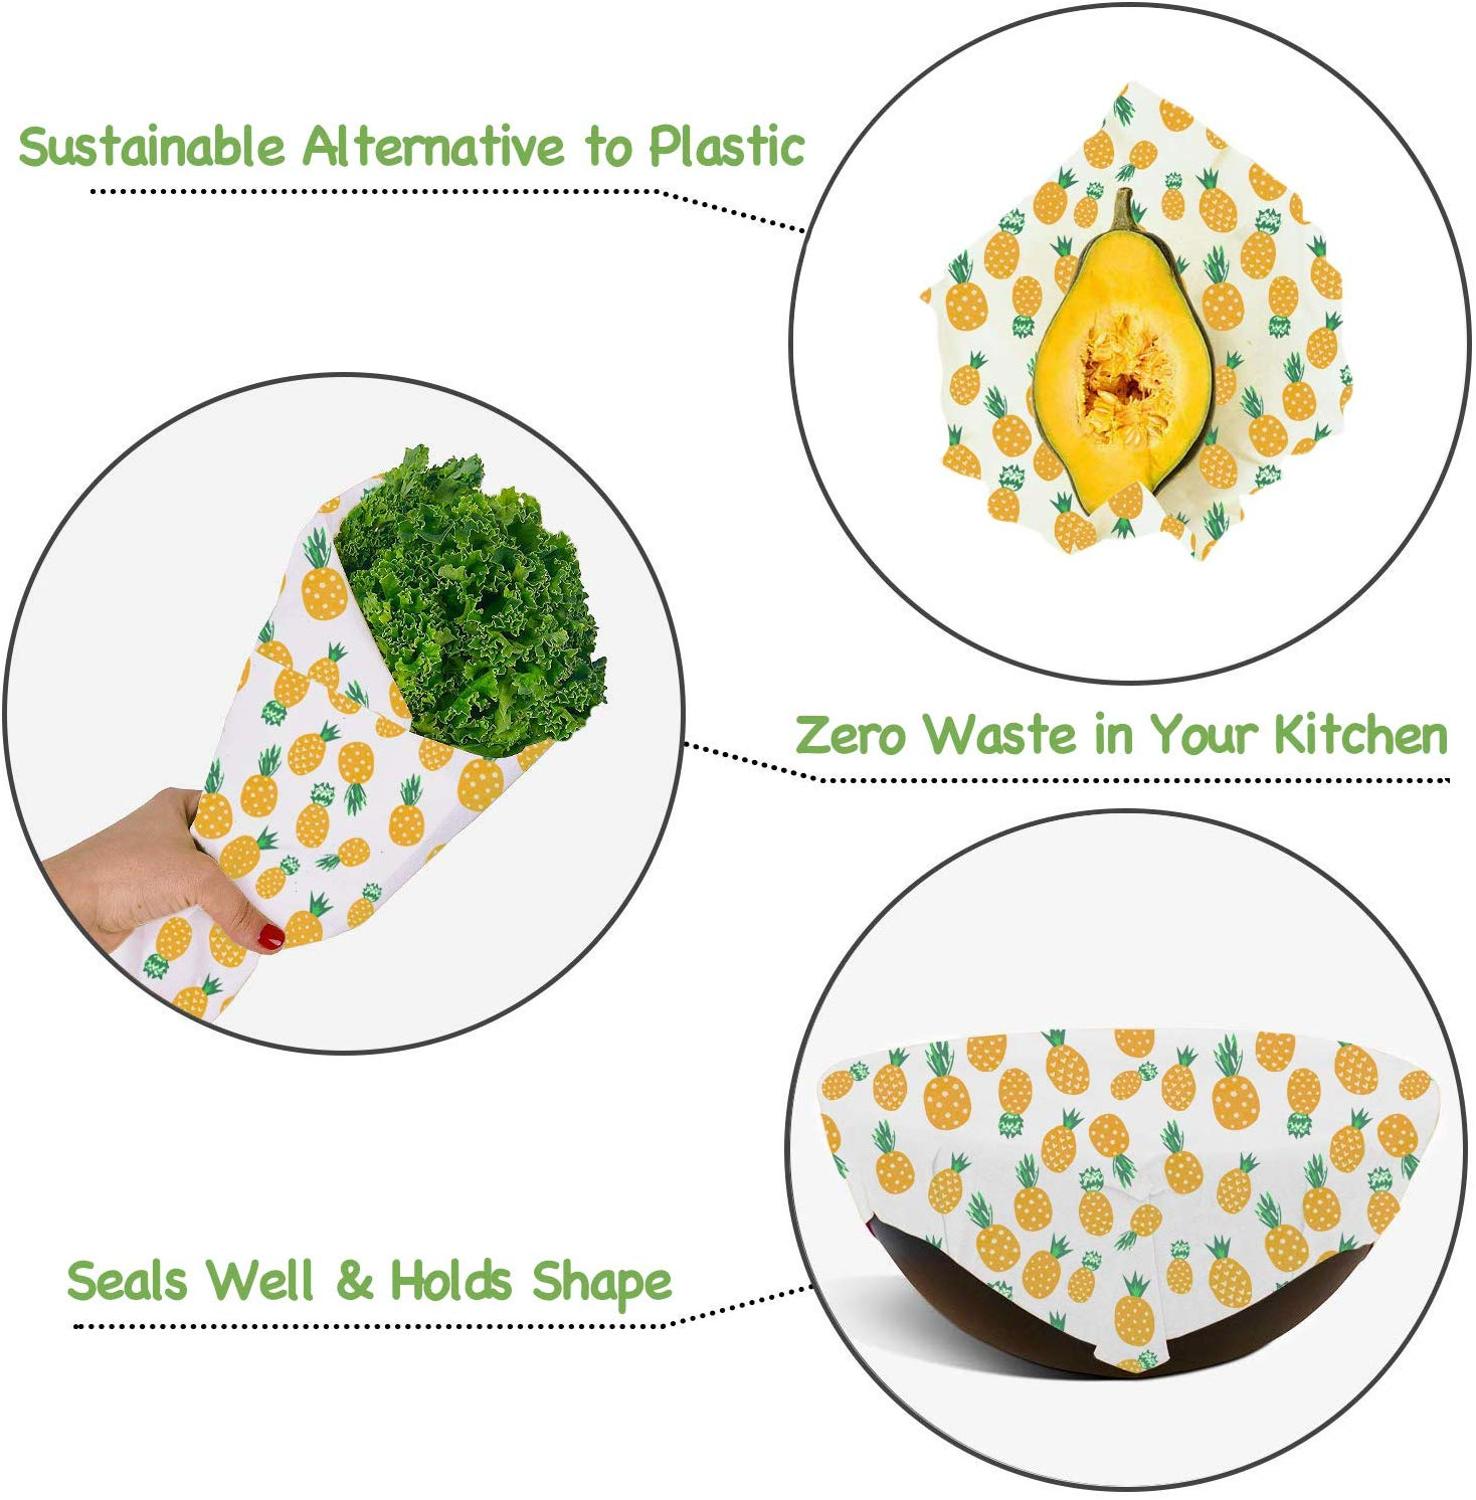 Reusable Beeswax Food Storage Wraps Zero Waste Cling Sandwichs Wrappers Sustainable Bowl Cover Eco Friendly Bees Wax Food Wraps